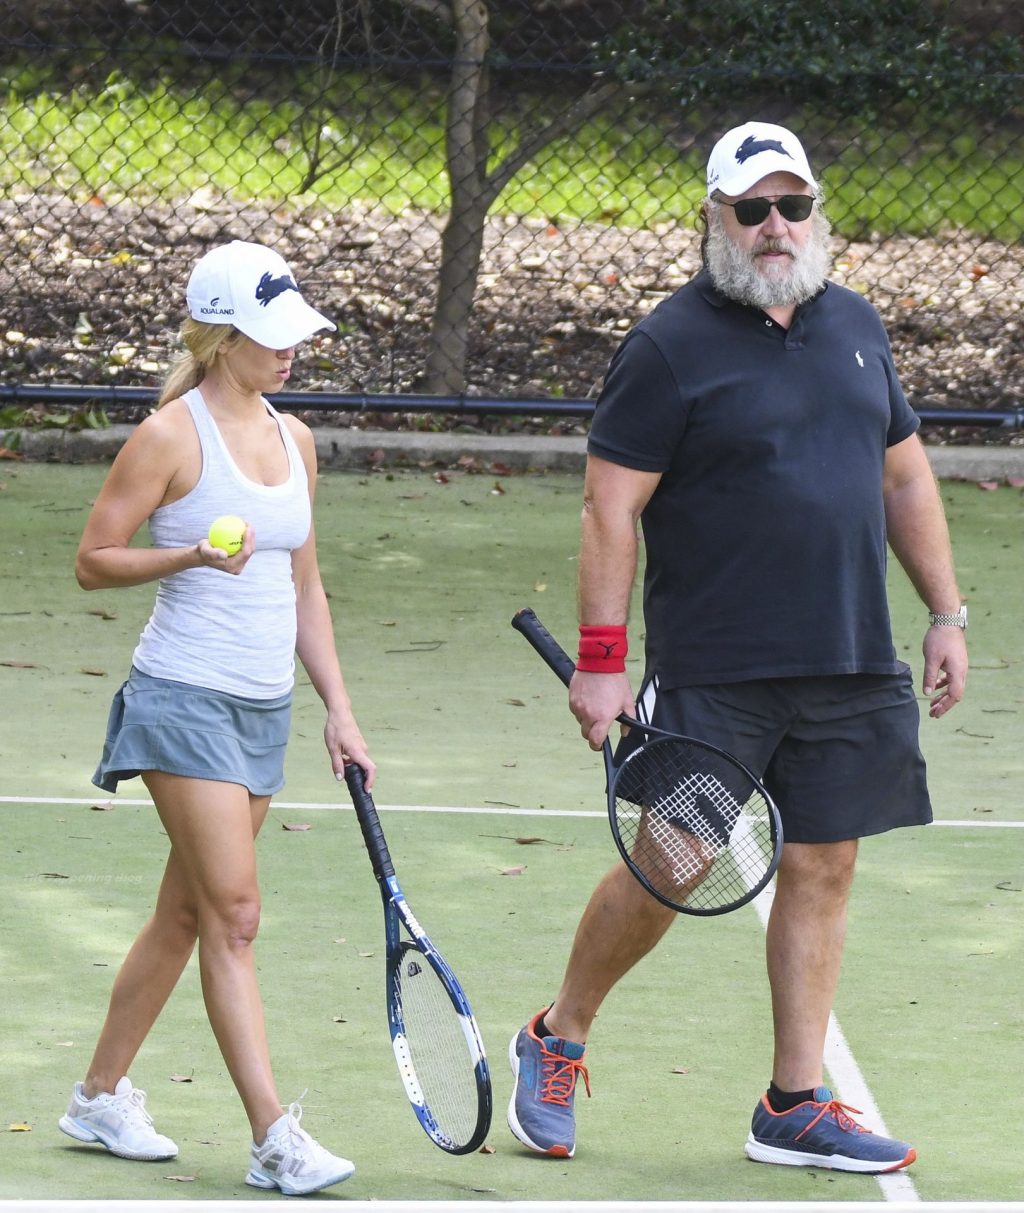 Russell Crowe &amp; Britney Theriot Hit the Courts for Their Tennis Match in Sydney (27 Photos)